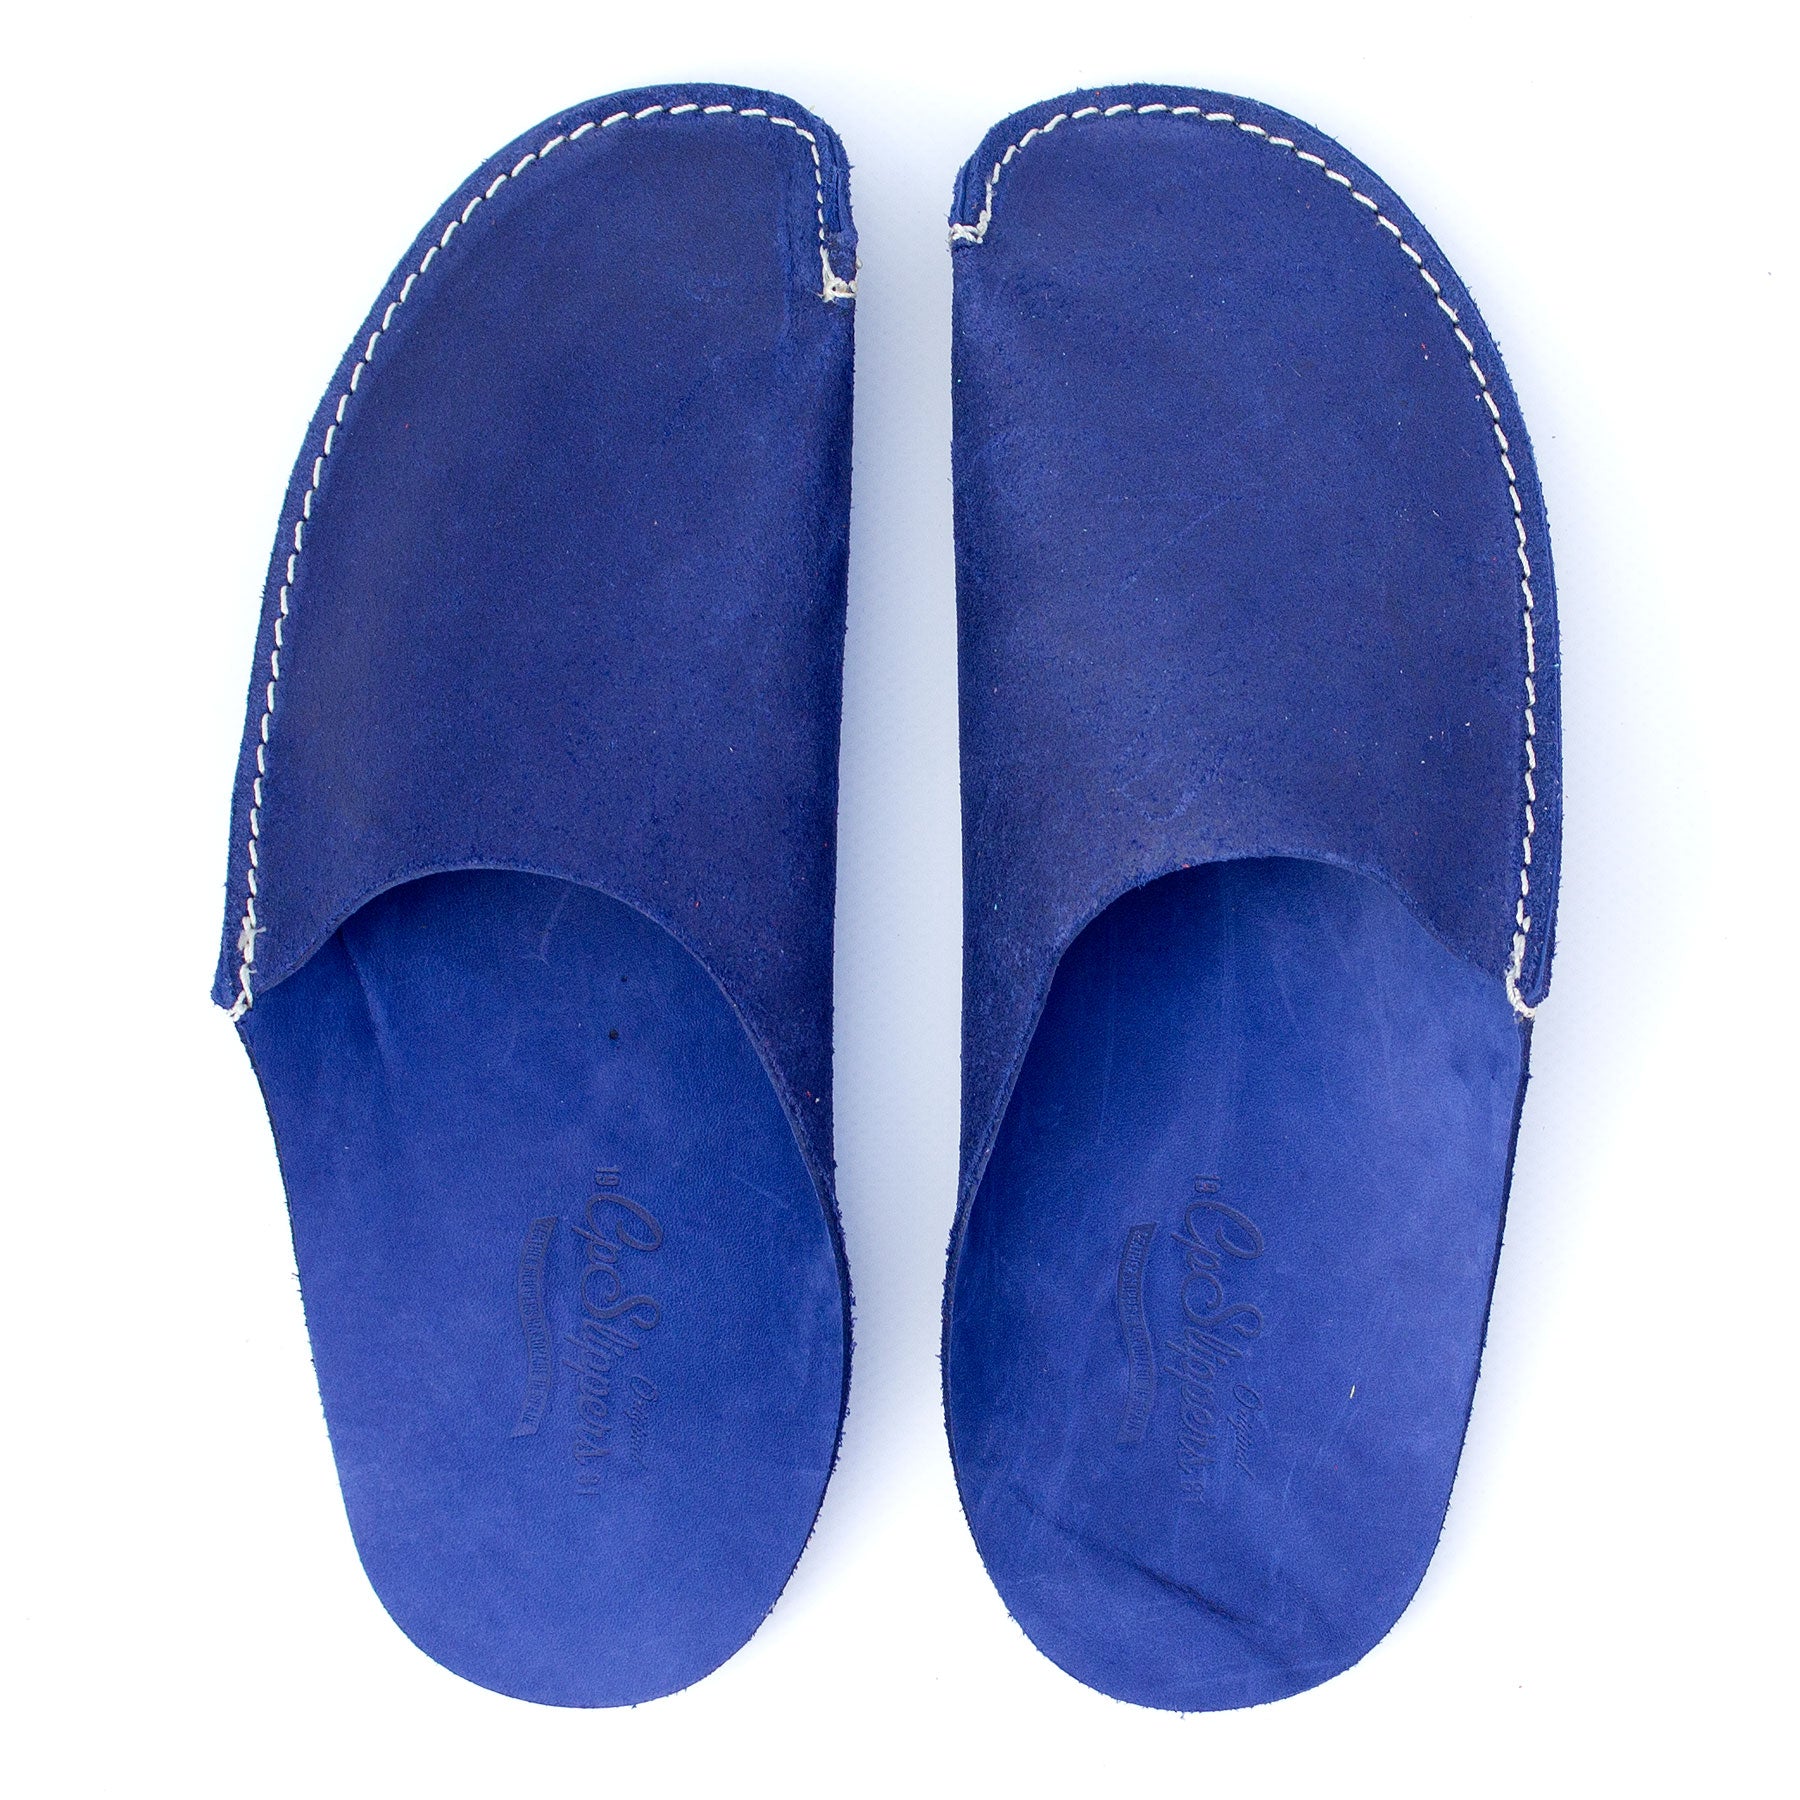 Blue CP Slippers minimalist for man and women